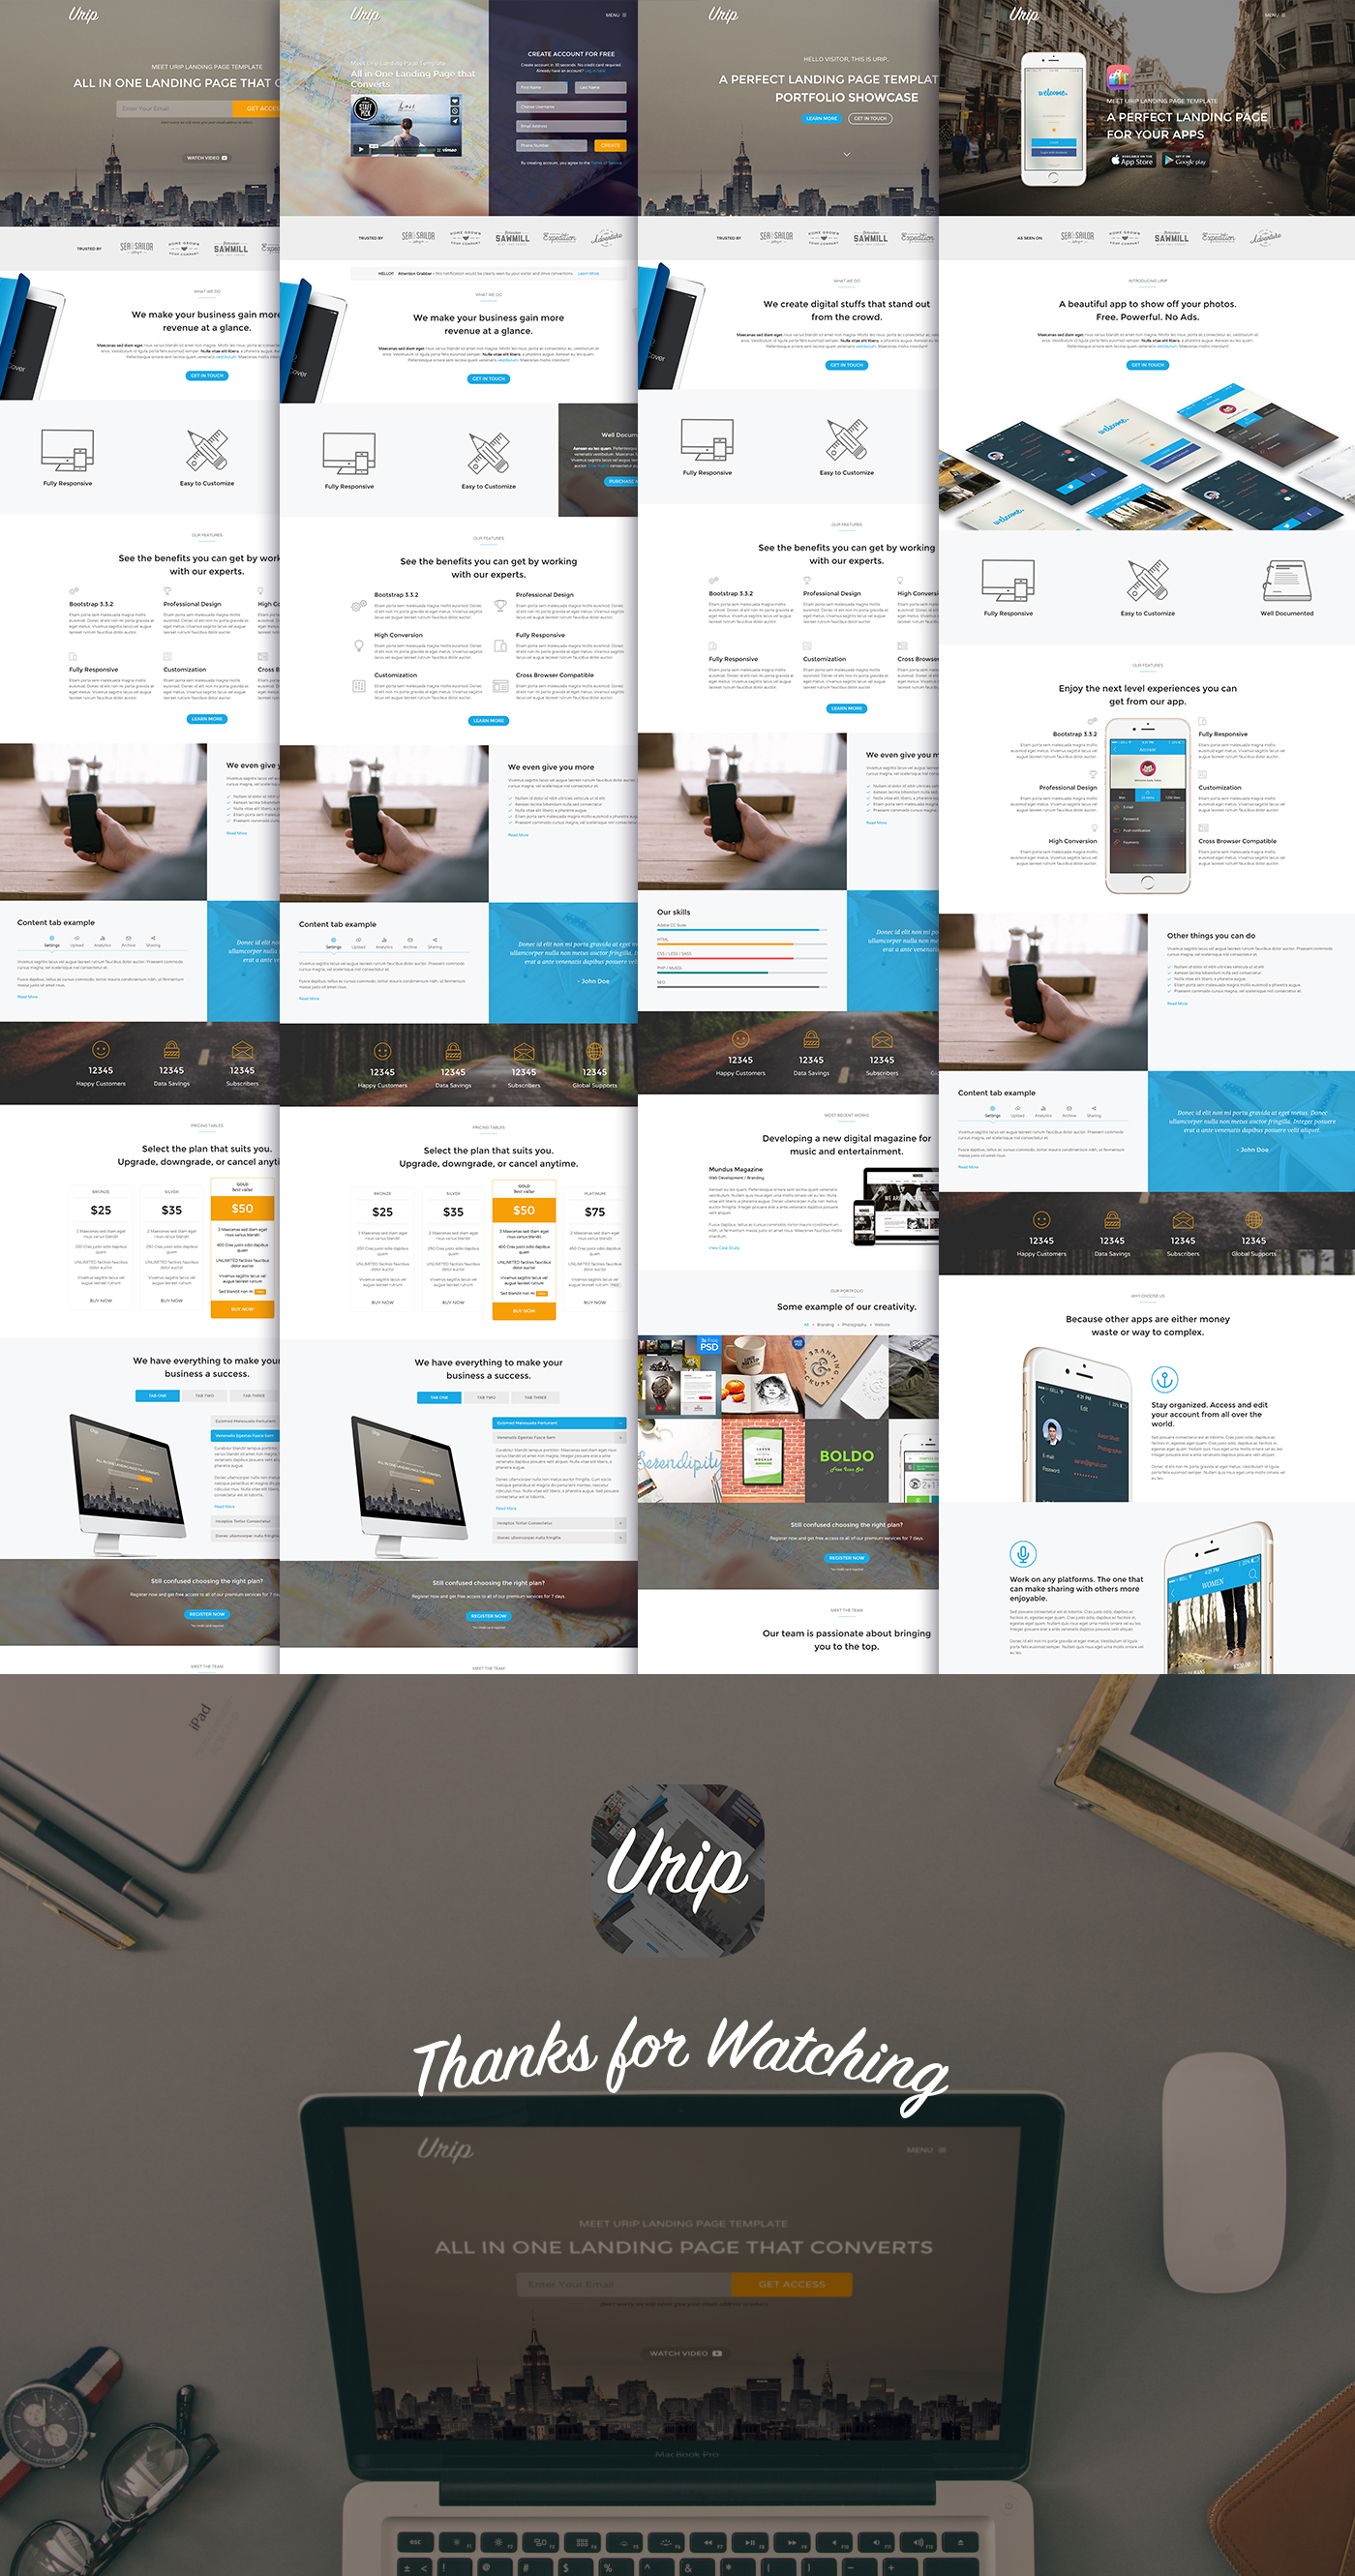 urip professional landing page template HTML css Responsive bootstrap creative business envato themeforest light blue orange